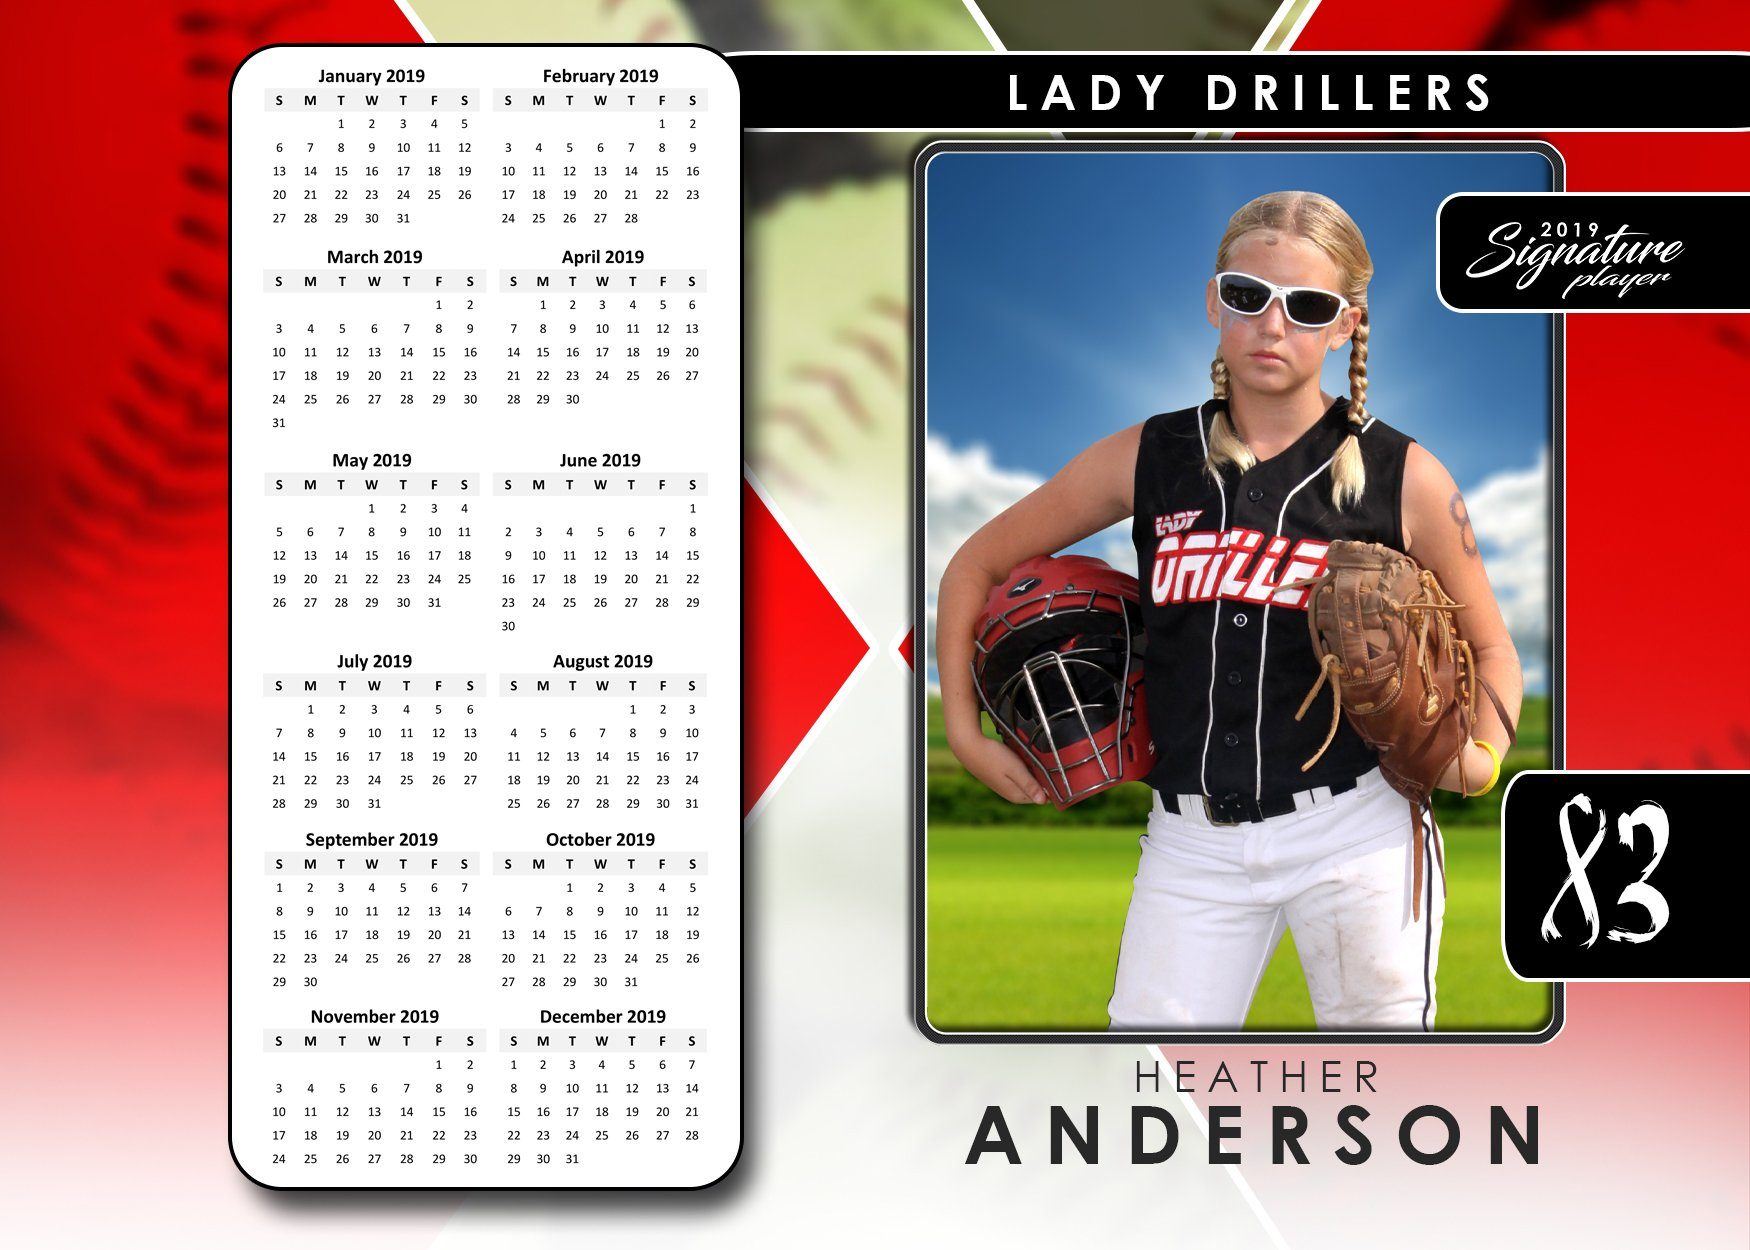 Signature Player - Softball - V2 - T&I Drop-In Collection-Photoshop Template - Photo Solutions